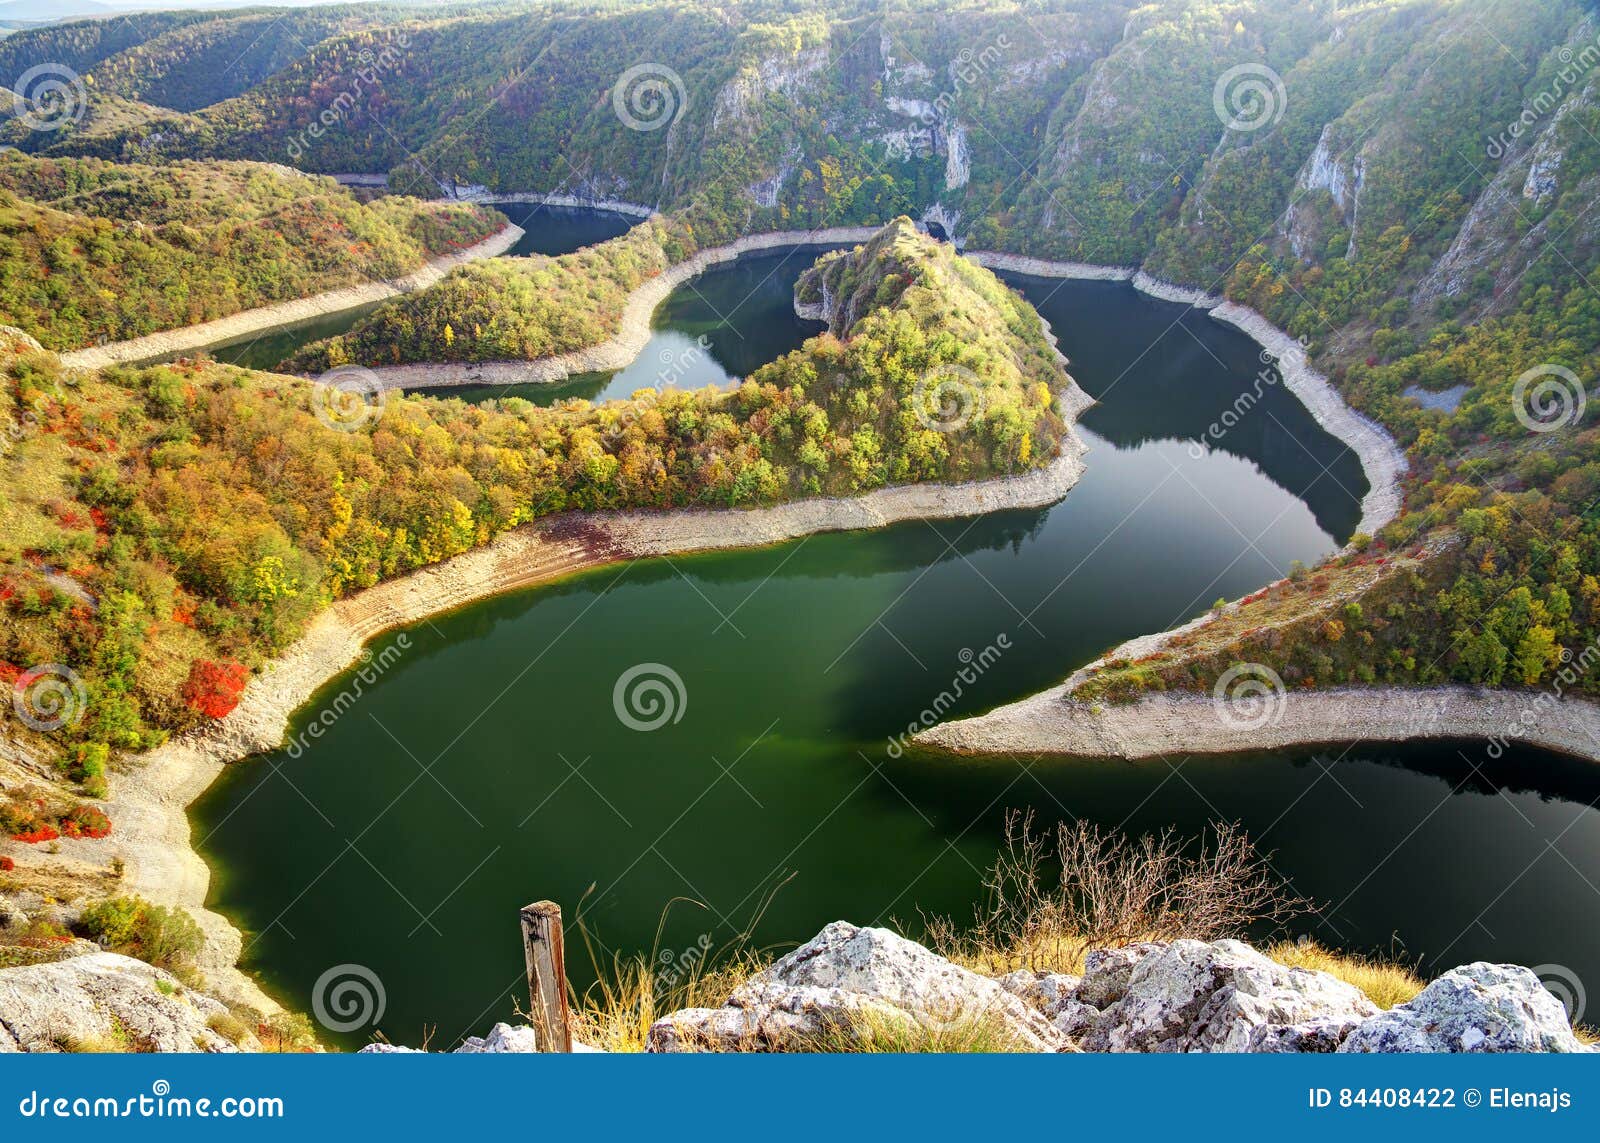 national park uvac, meanders of river uvac - autumn picture